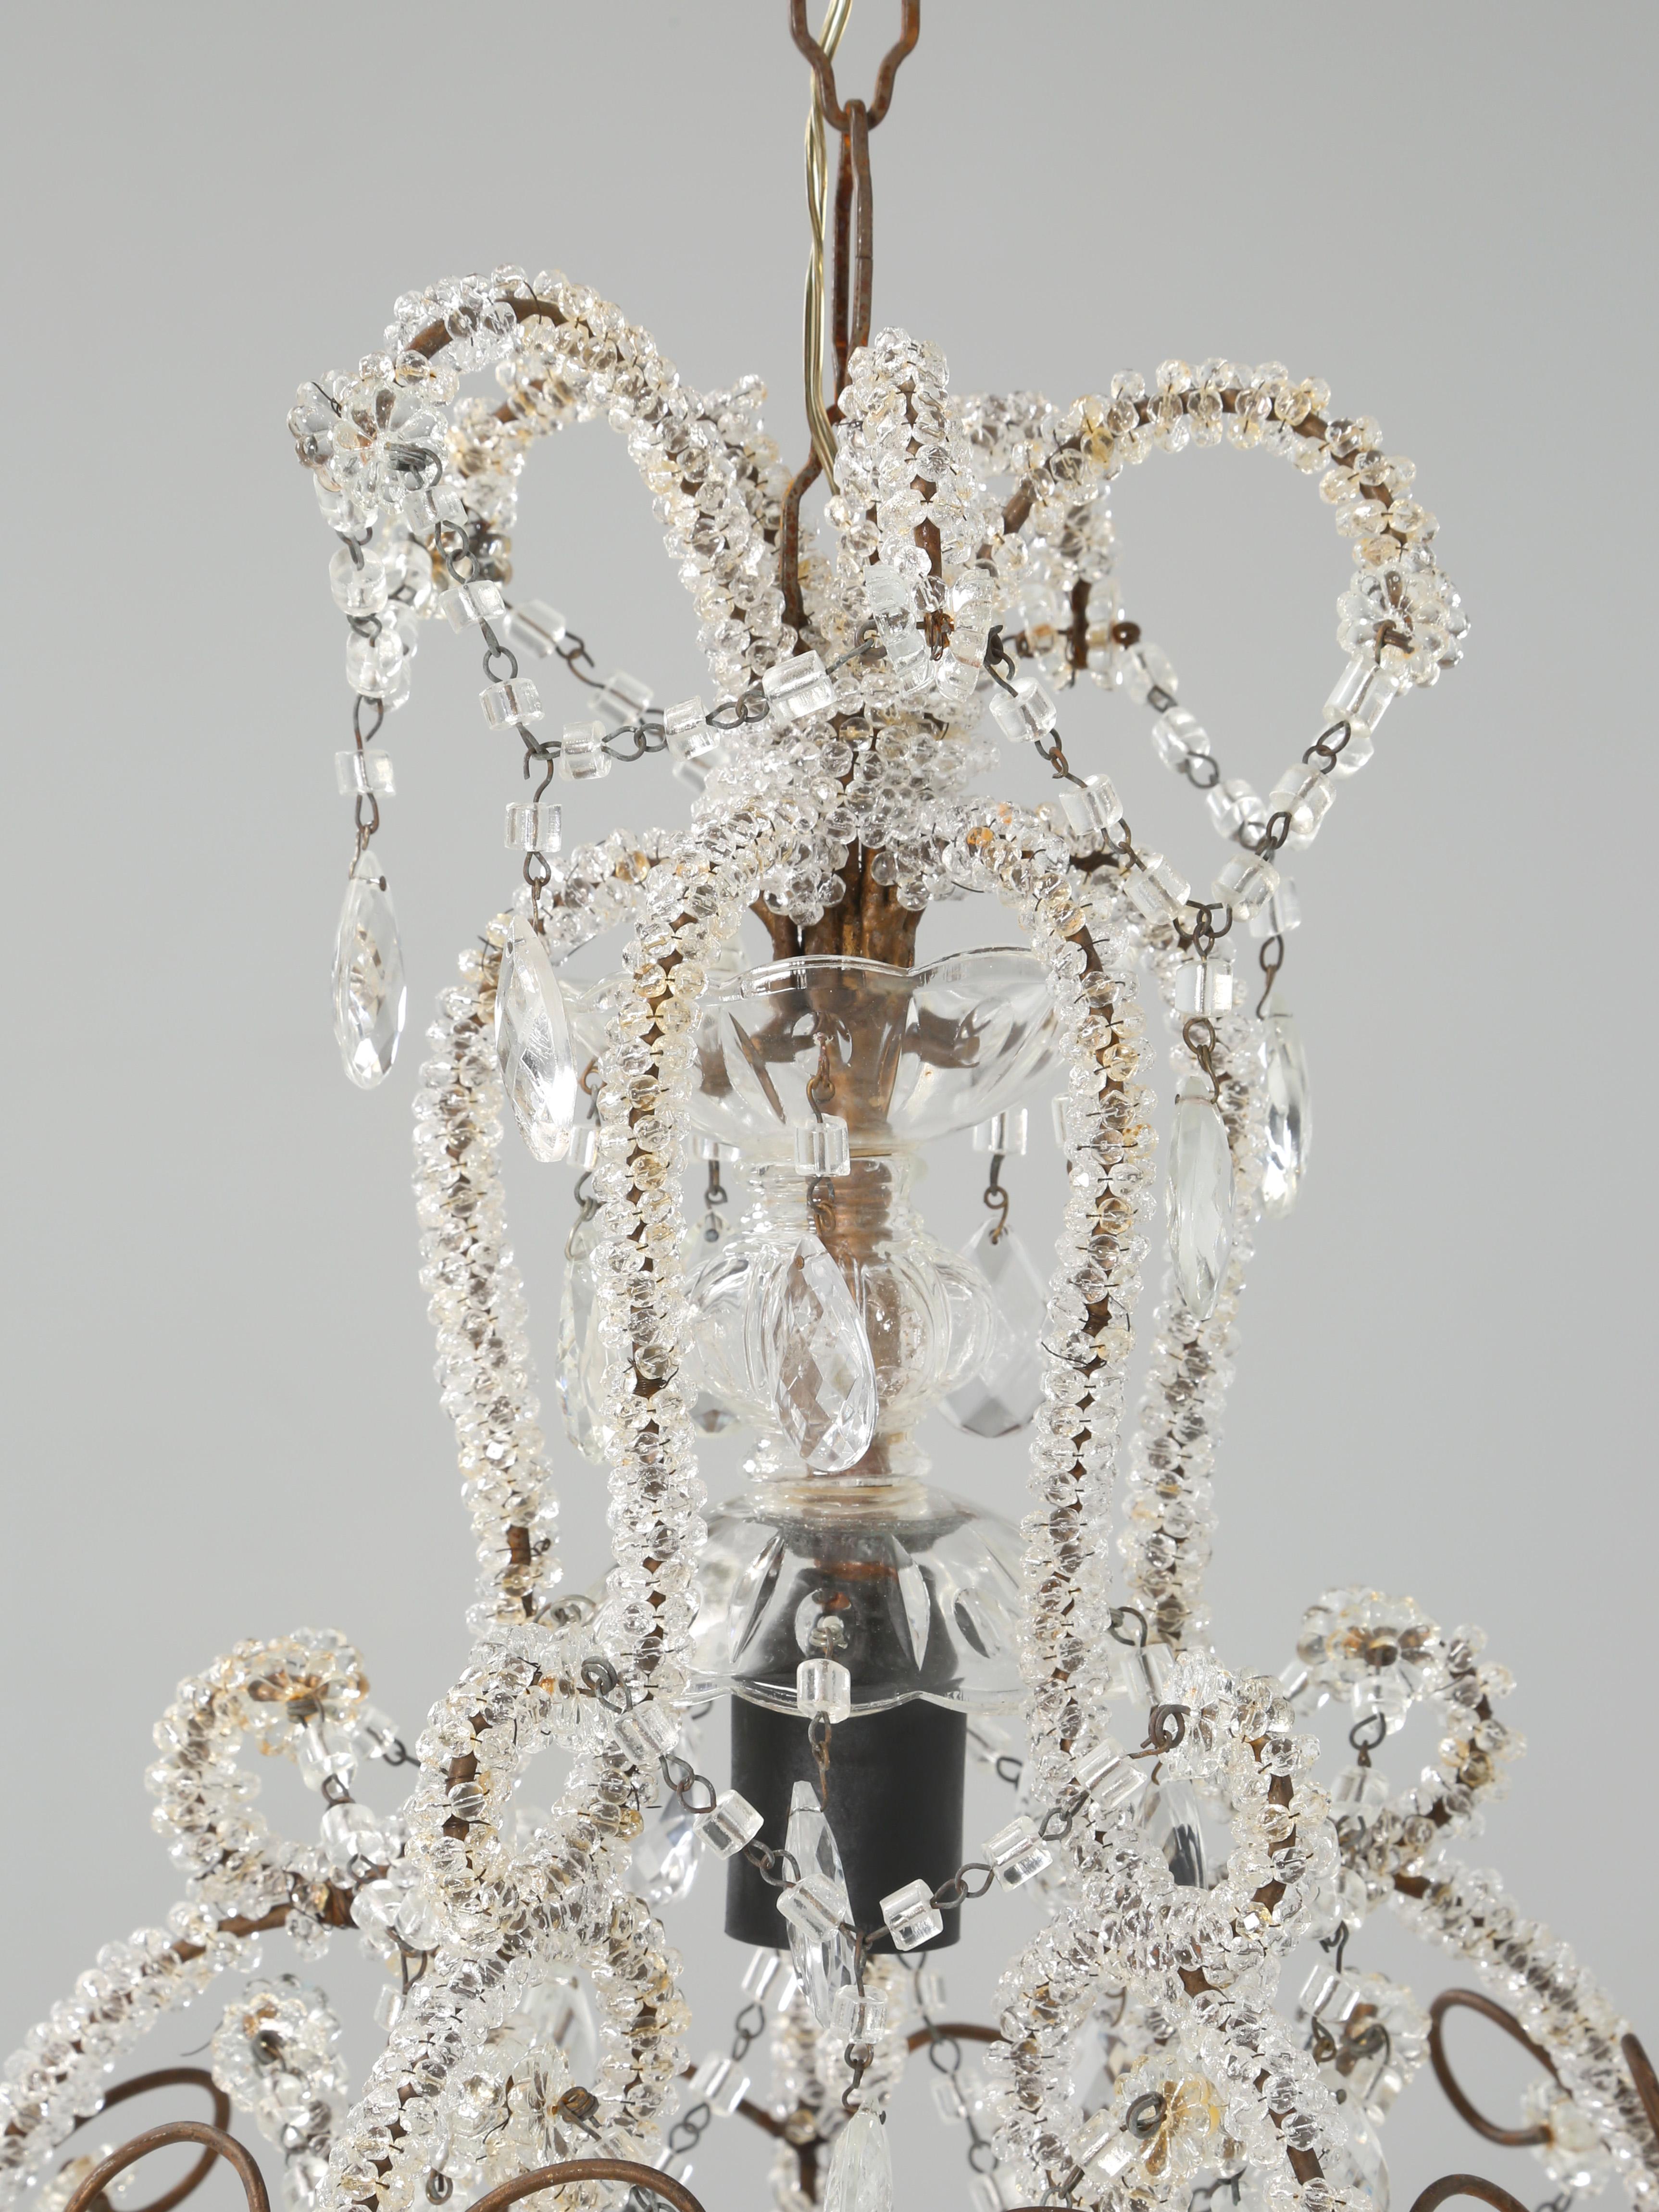 Hand-Crafted Vintage Italian Gilded Chandelier in a Small